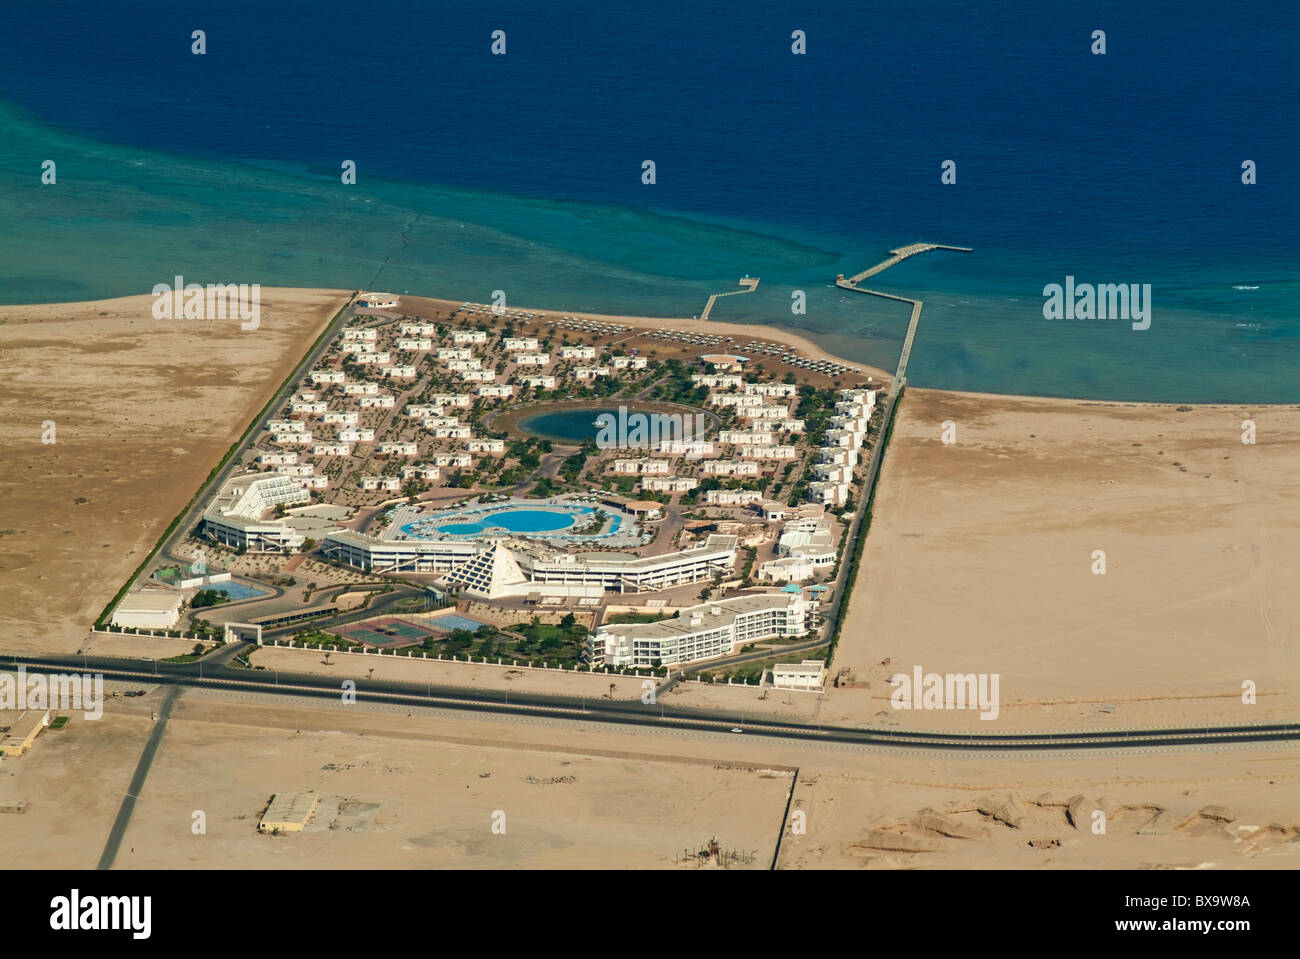 Read Sea holiday resort aerial view - View of coastal resorts and surrounding desert, Hurghada, Red Sea, Egypt. Stock Photo